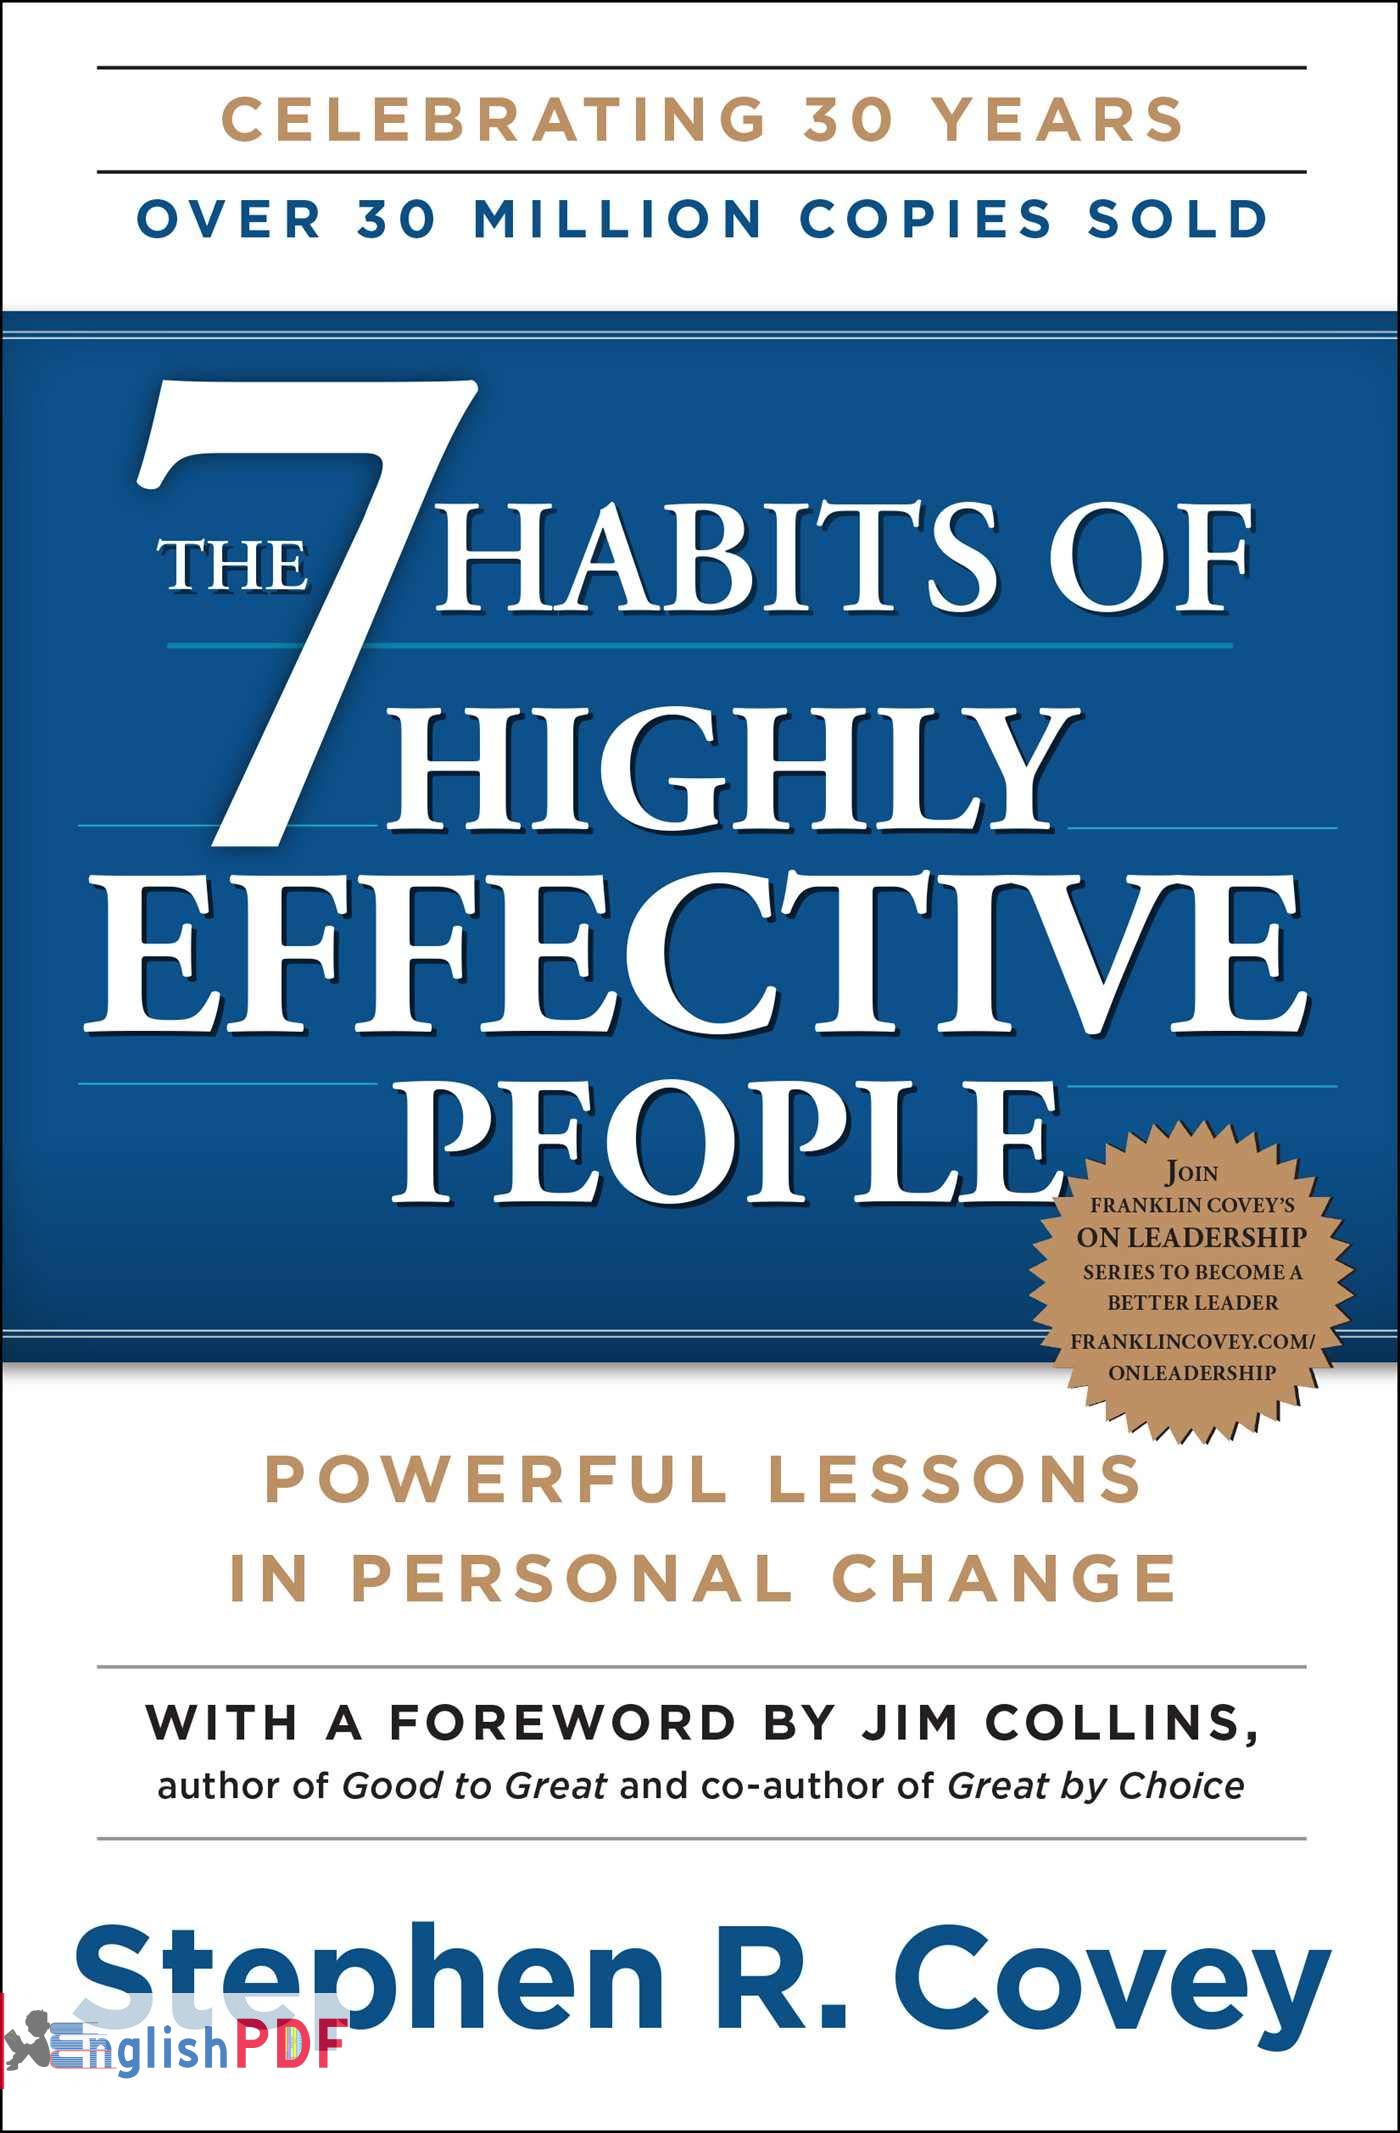 7 habits of highly effective people english version pdf download